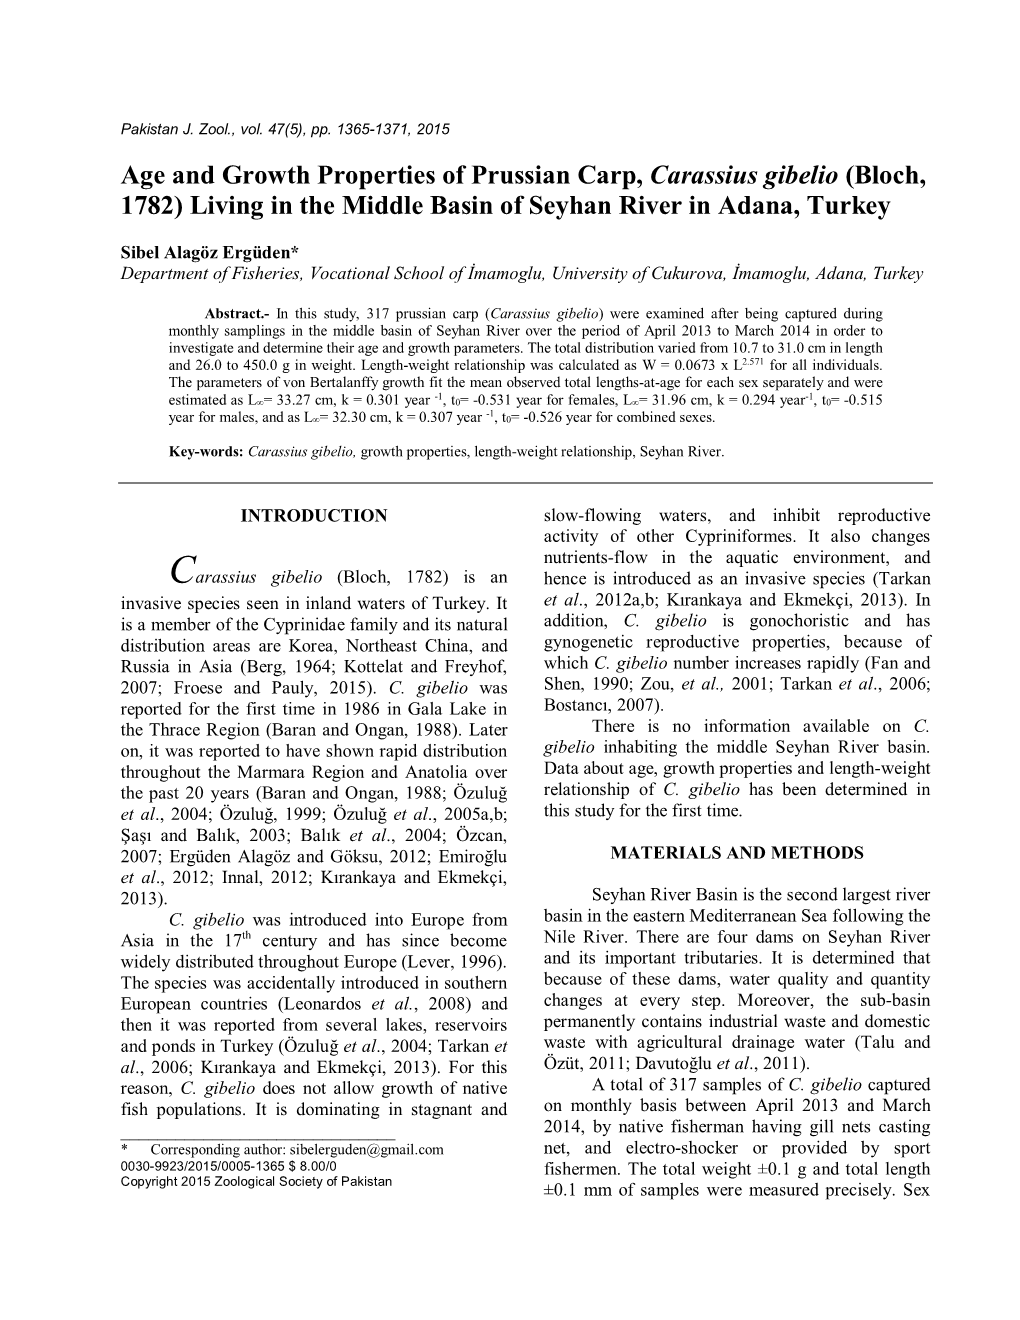 Age and Growth Properties of Prussian Carp, Carassius Gibelio (Bloch, 1782) Living in the Middle Basin of Seyhan River in Adana, Turkey